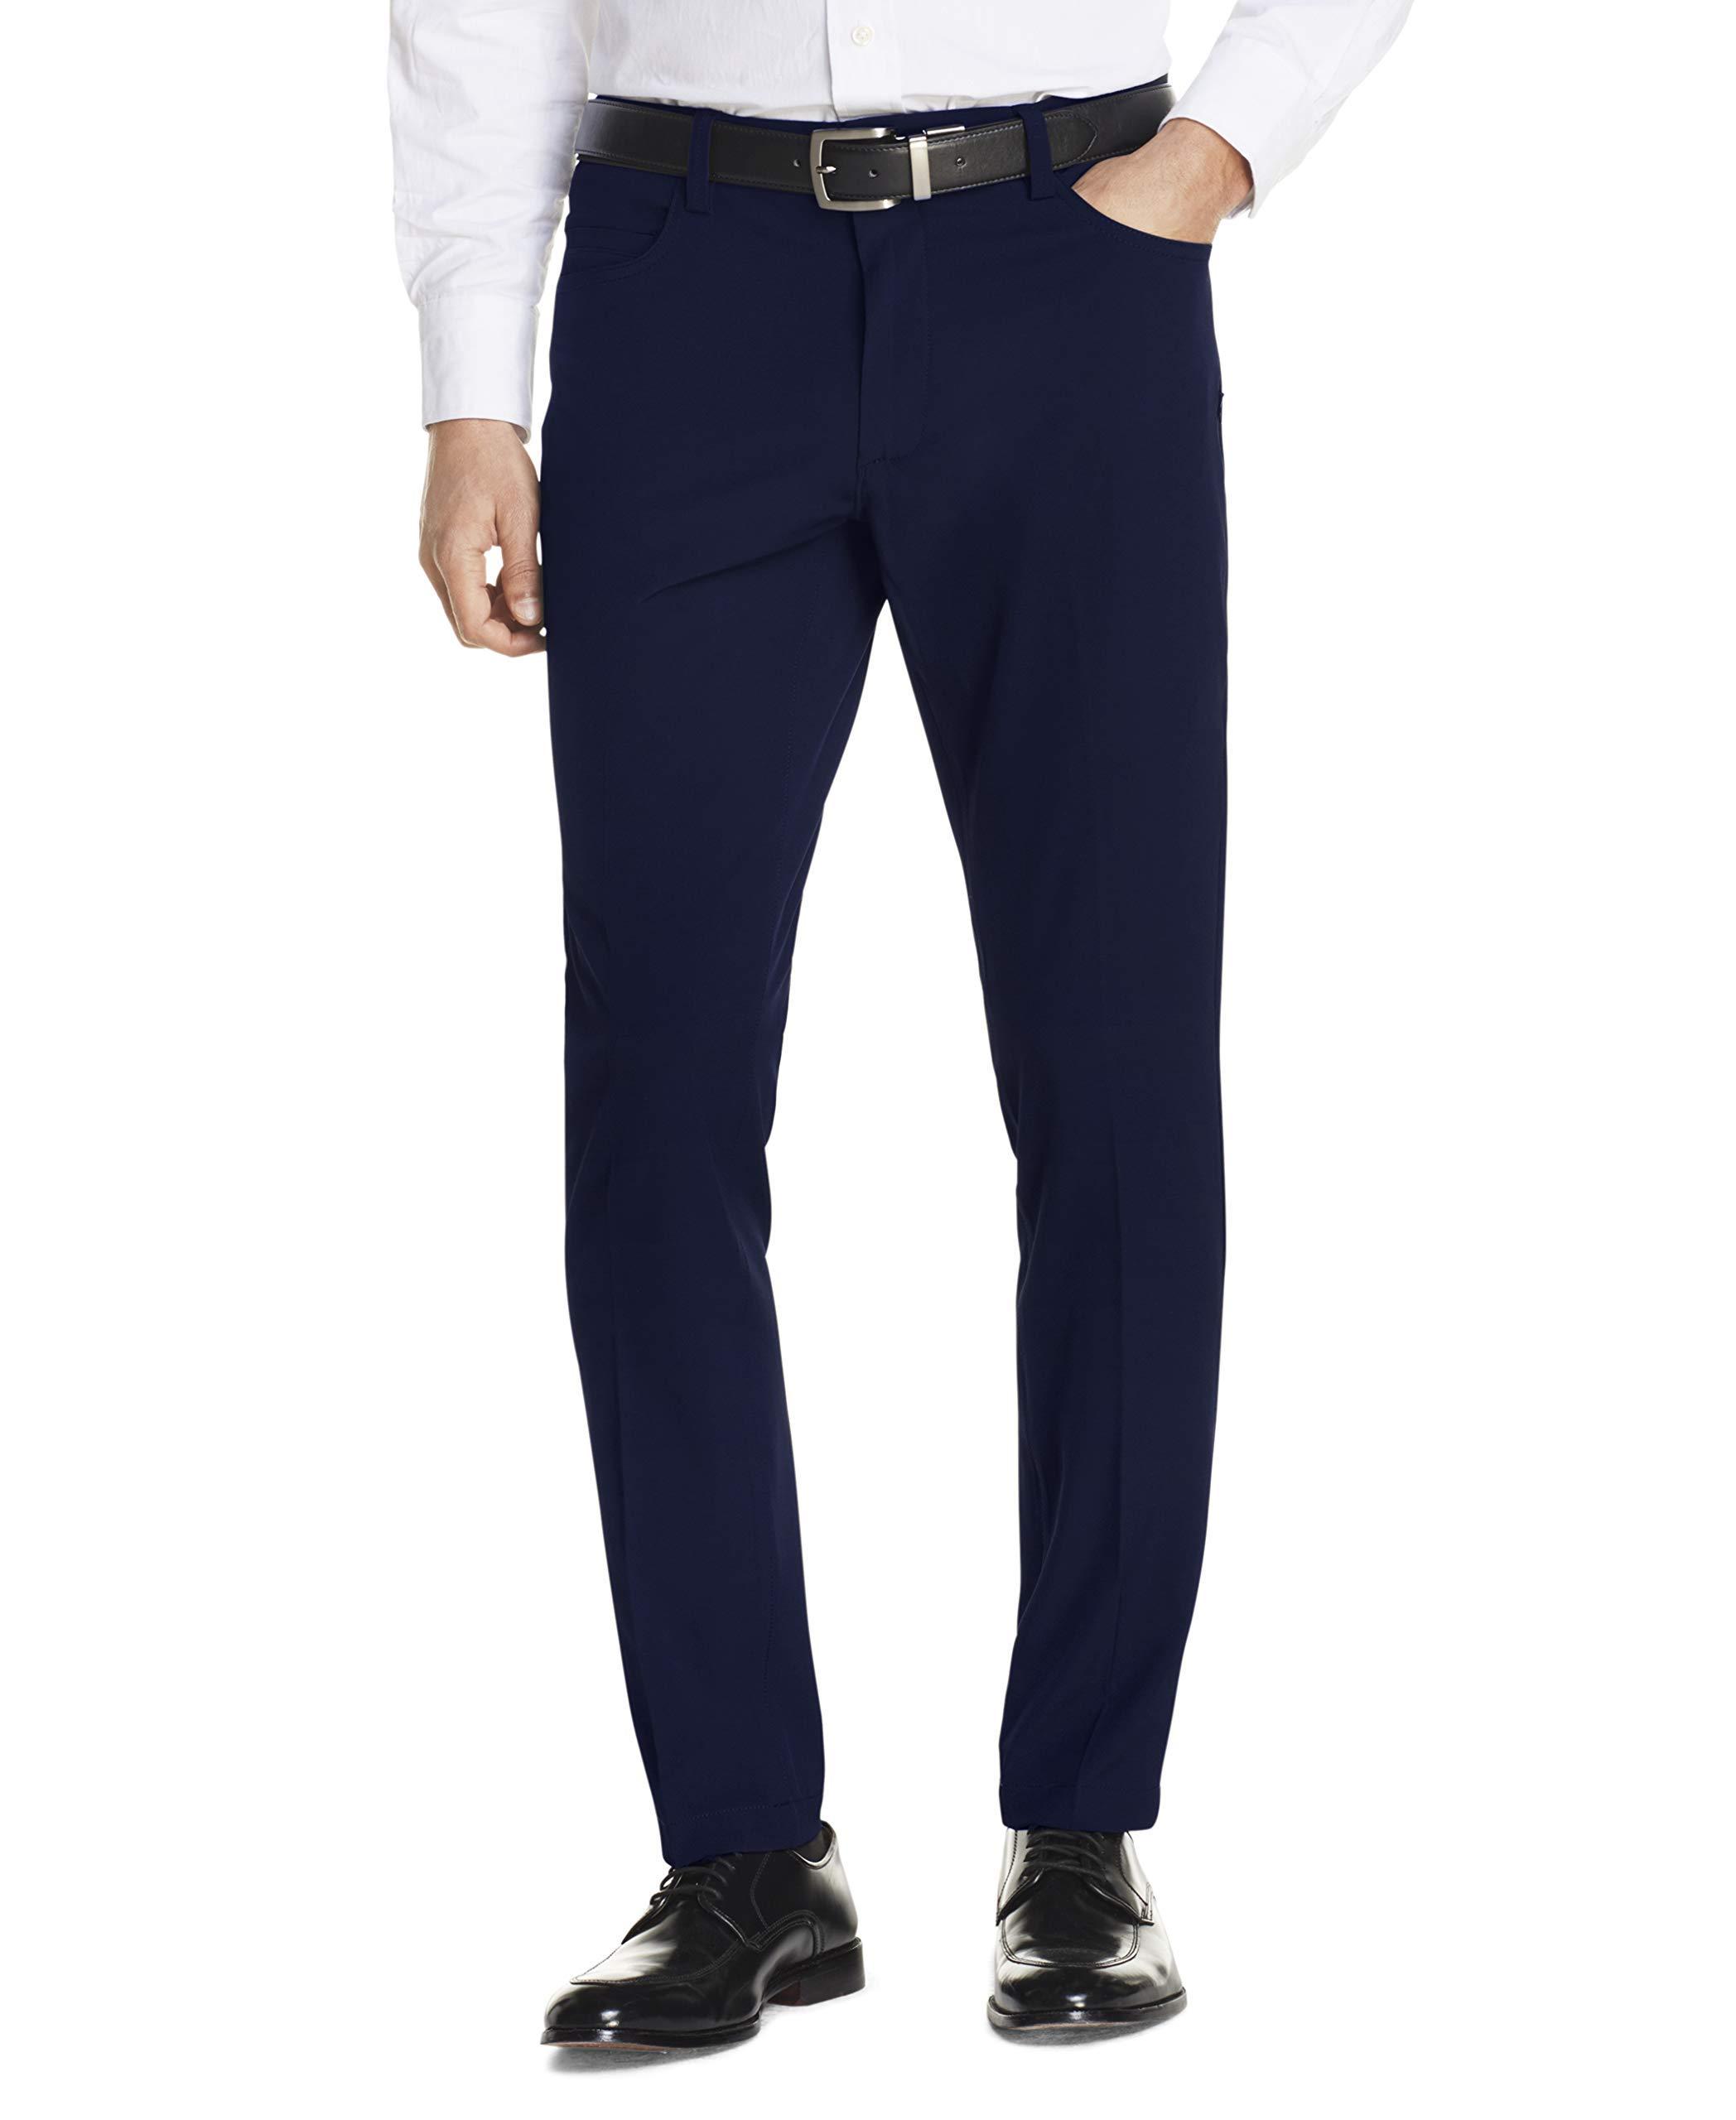 Izod Advantage Performance 5-pocket Straight Tapered Fit Chino Pant in